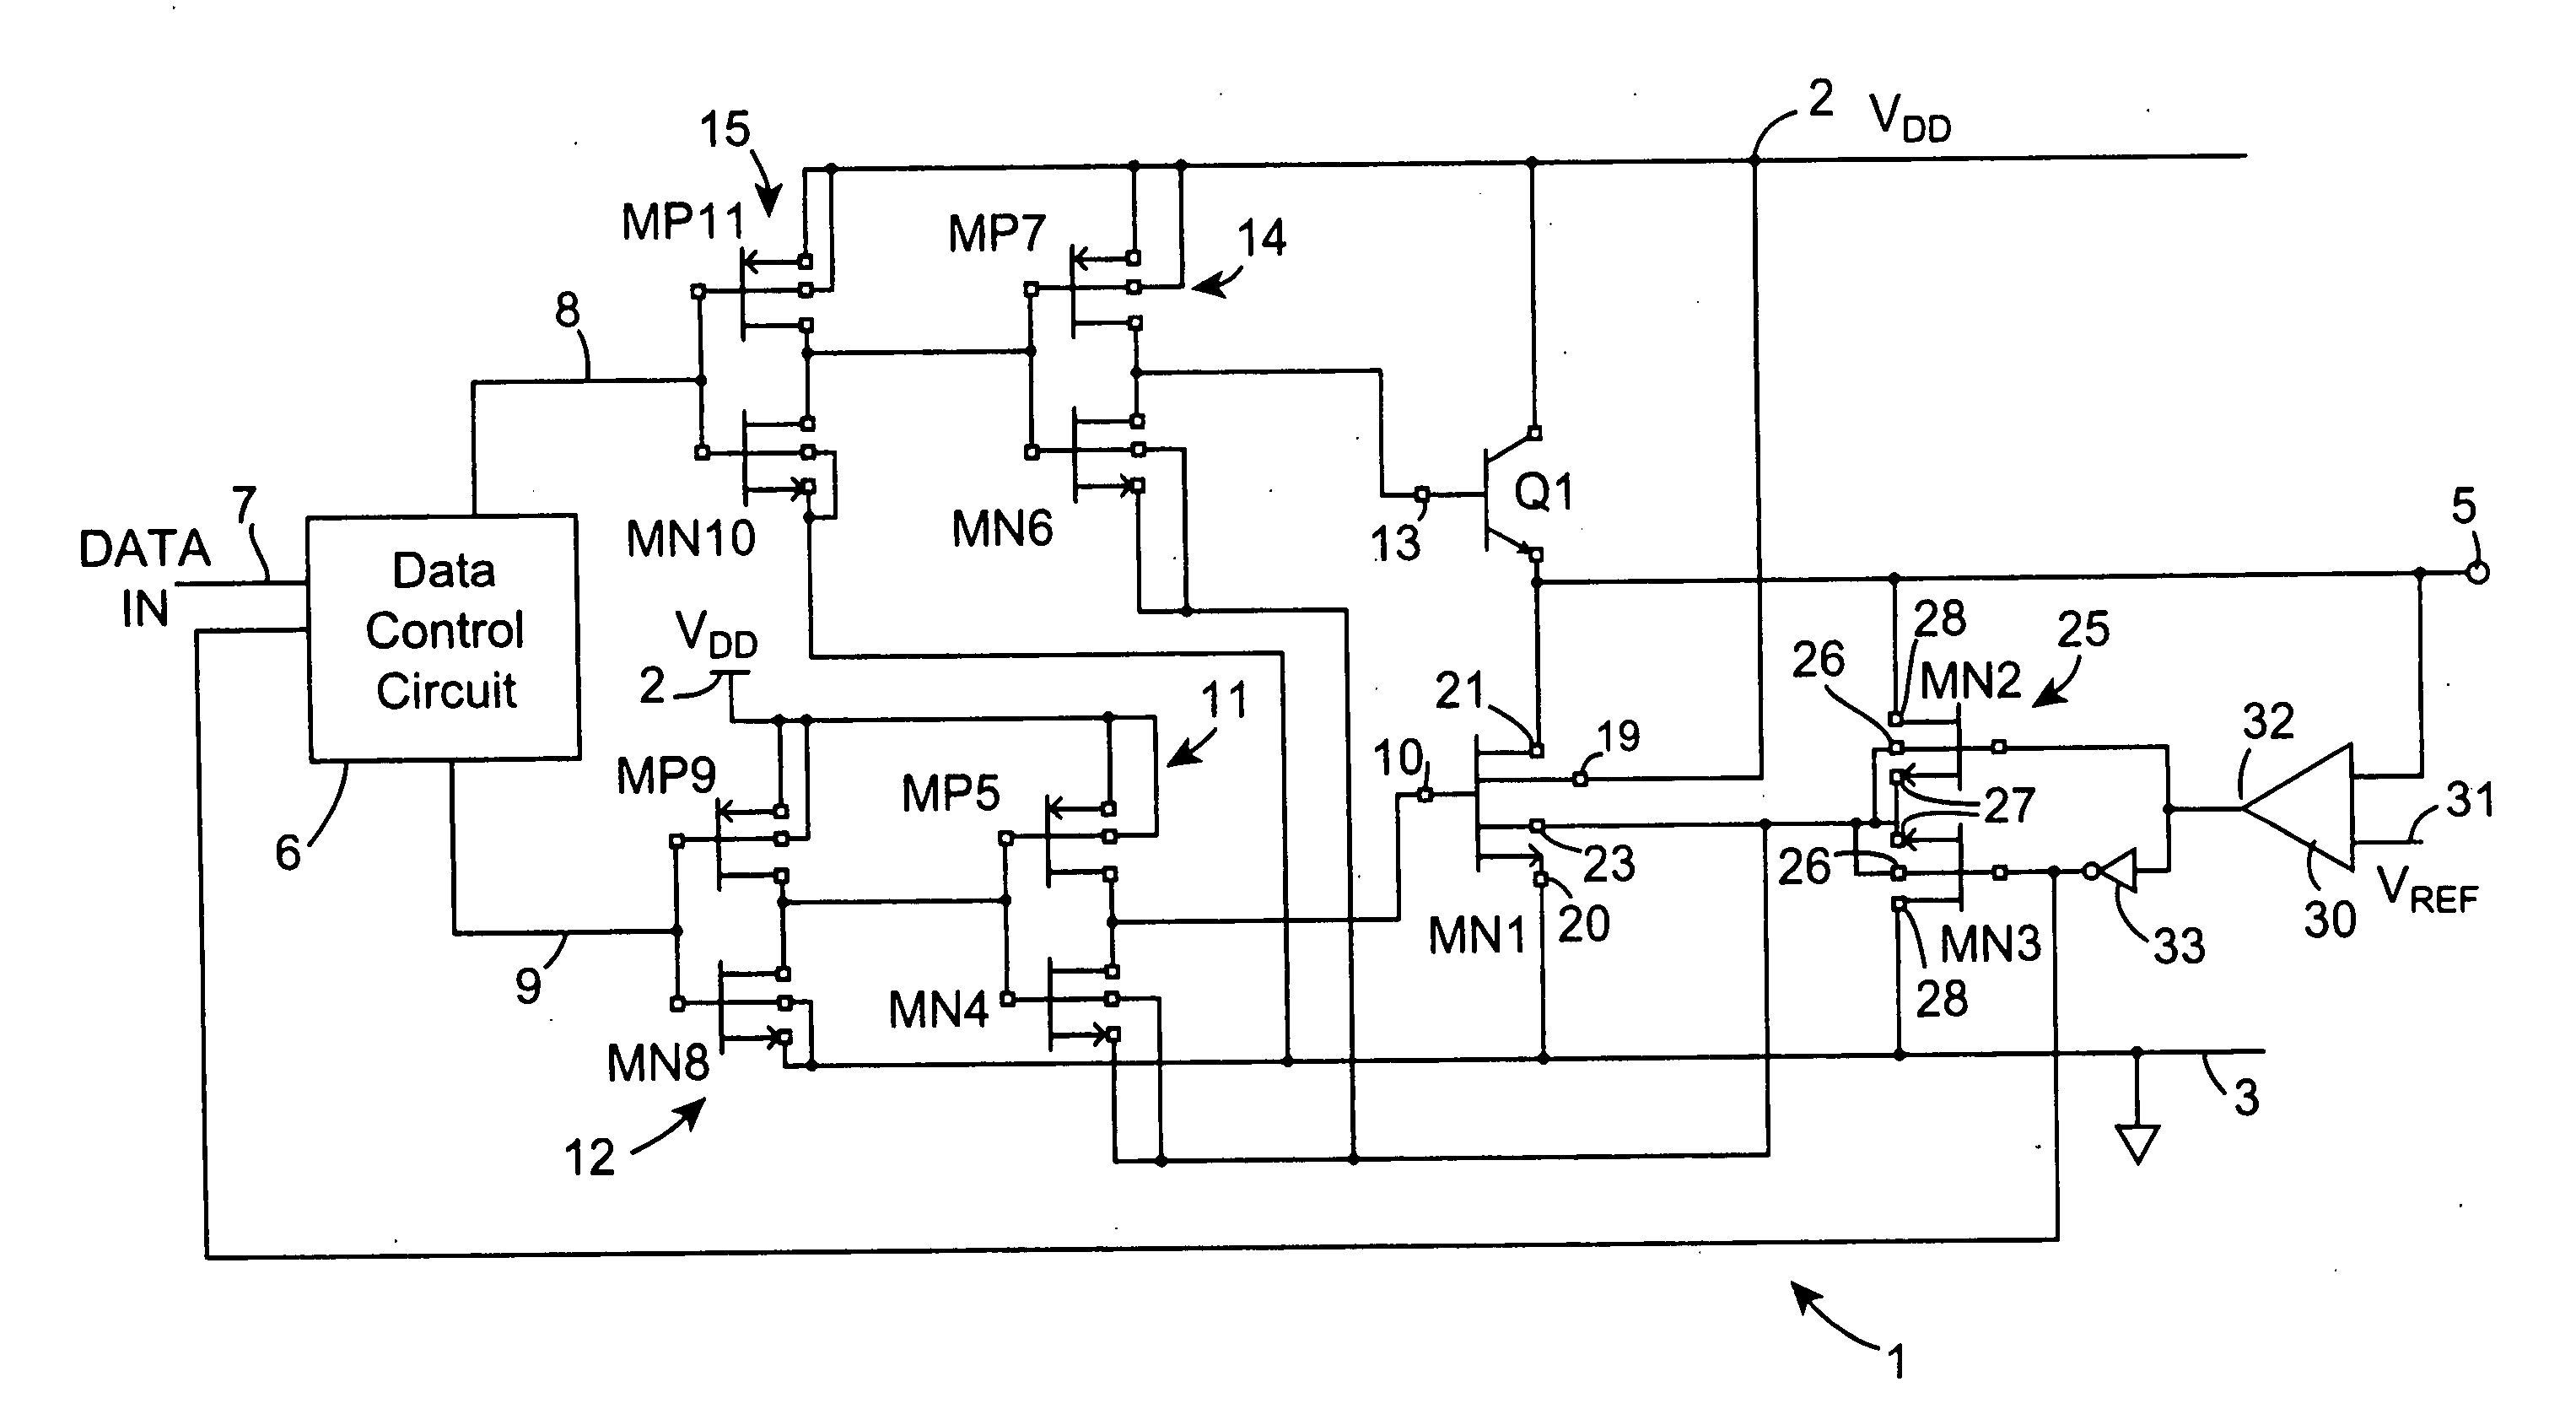 Output stage interface circuit for outputting digital data onto a data bus